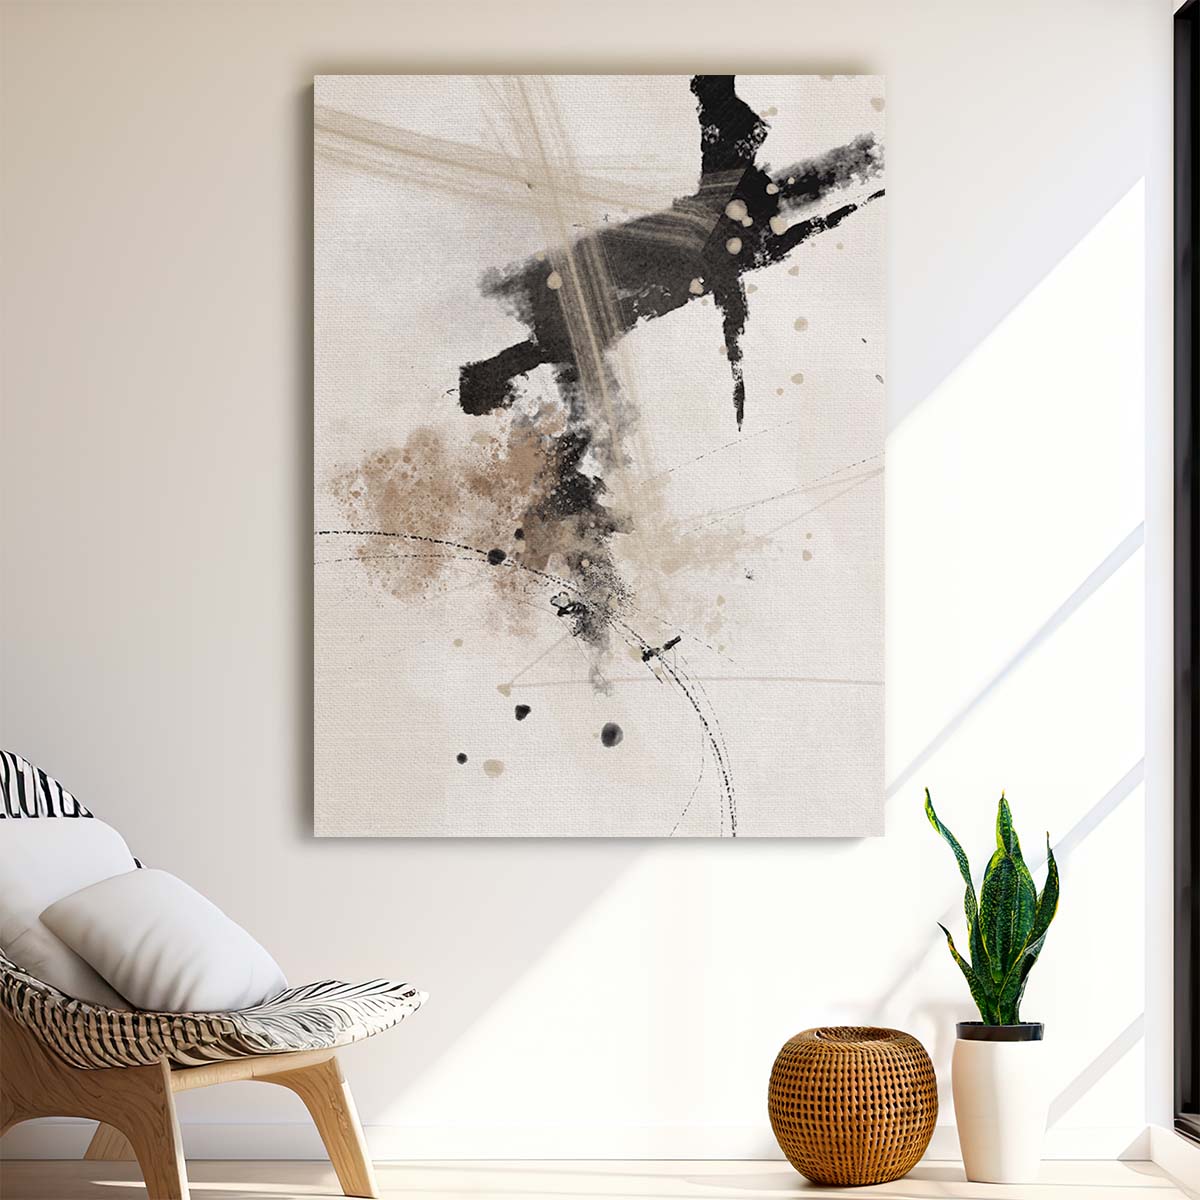 Abstract Beige & Black Illustration Painting with Geometric Splash Pattern by Luxuriance Designs, made in USA